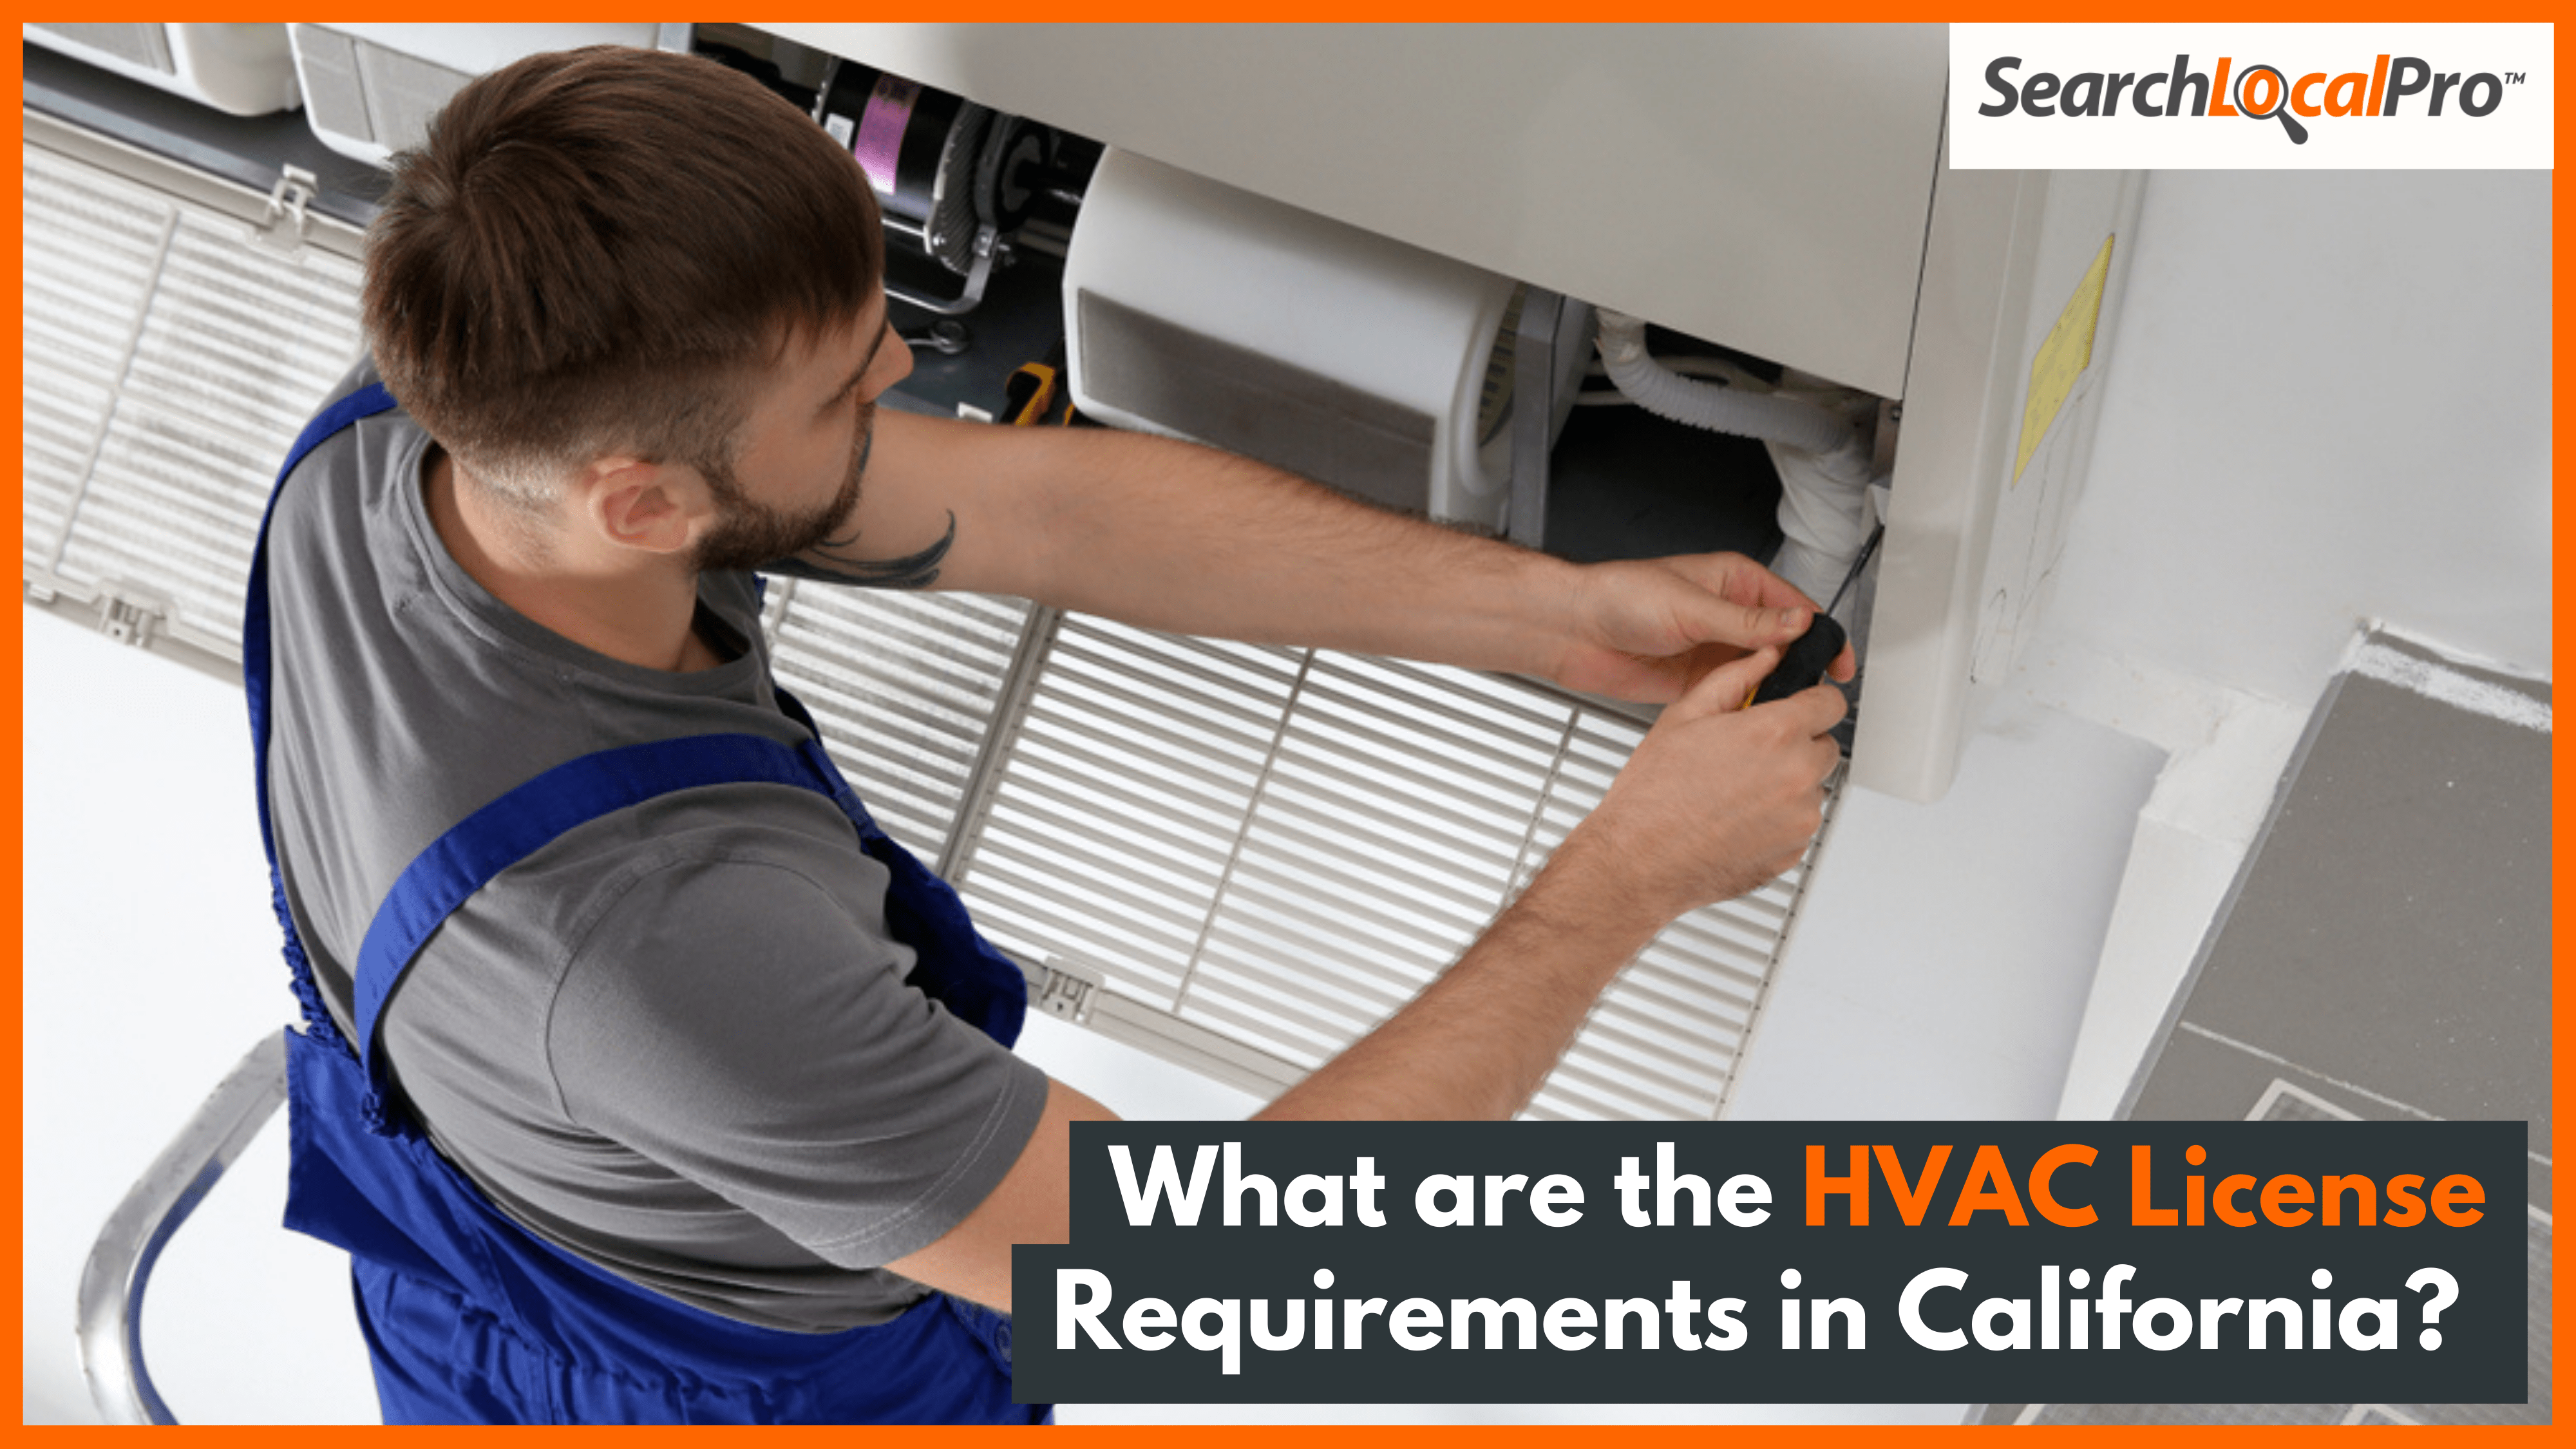 What are the HVAC License Requirements in California